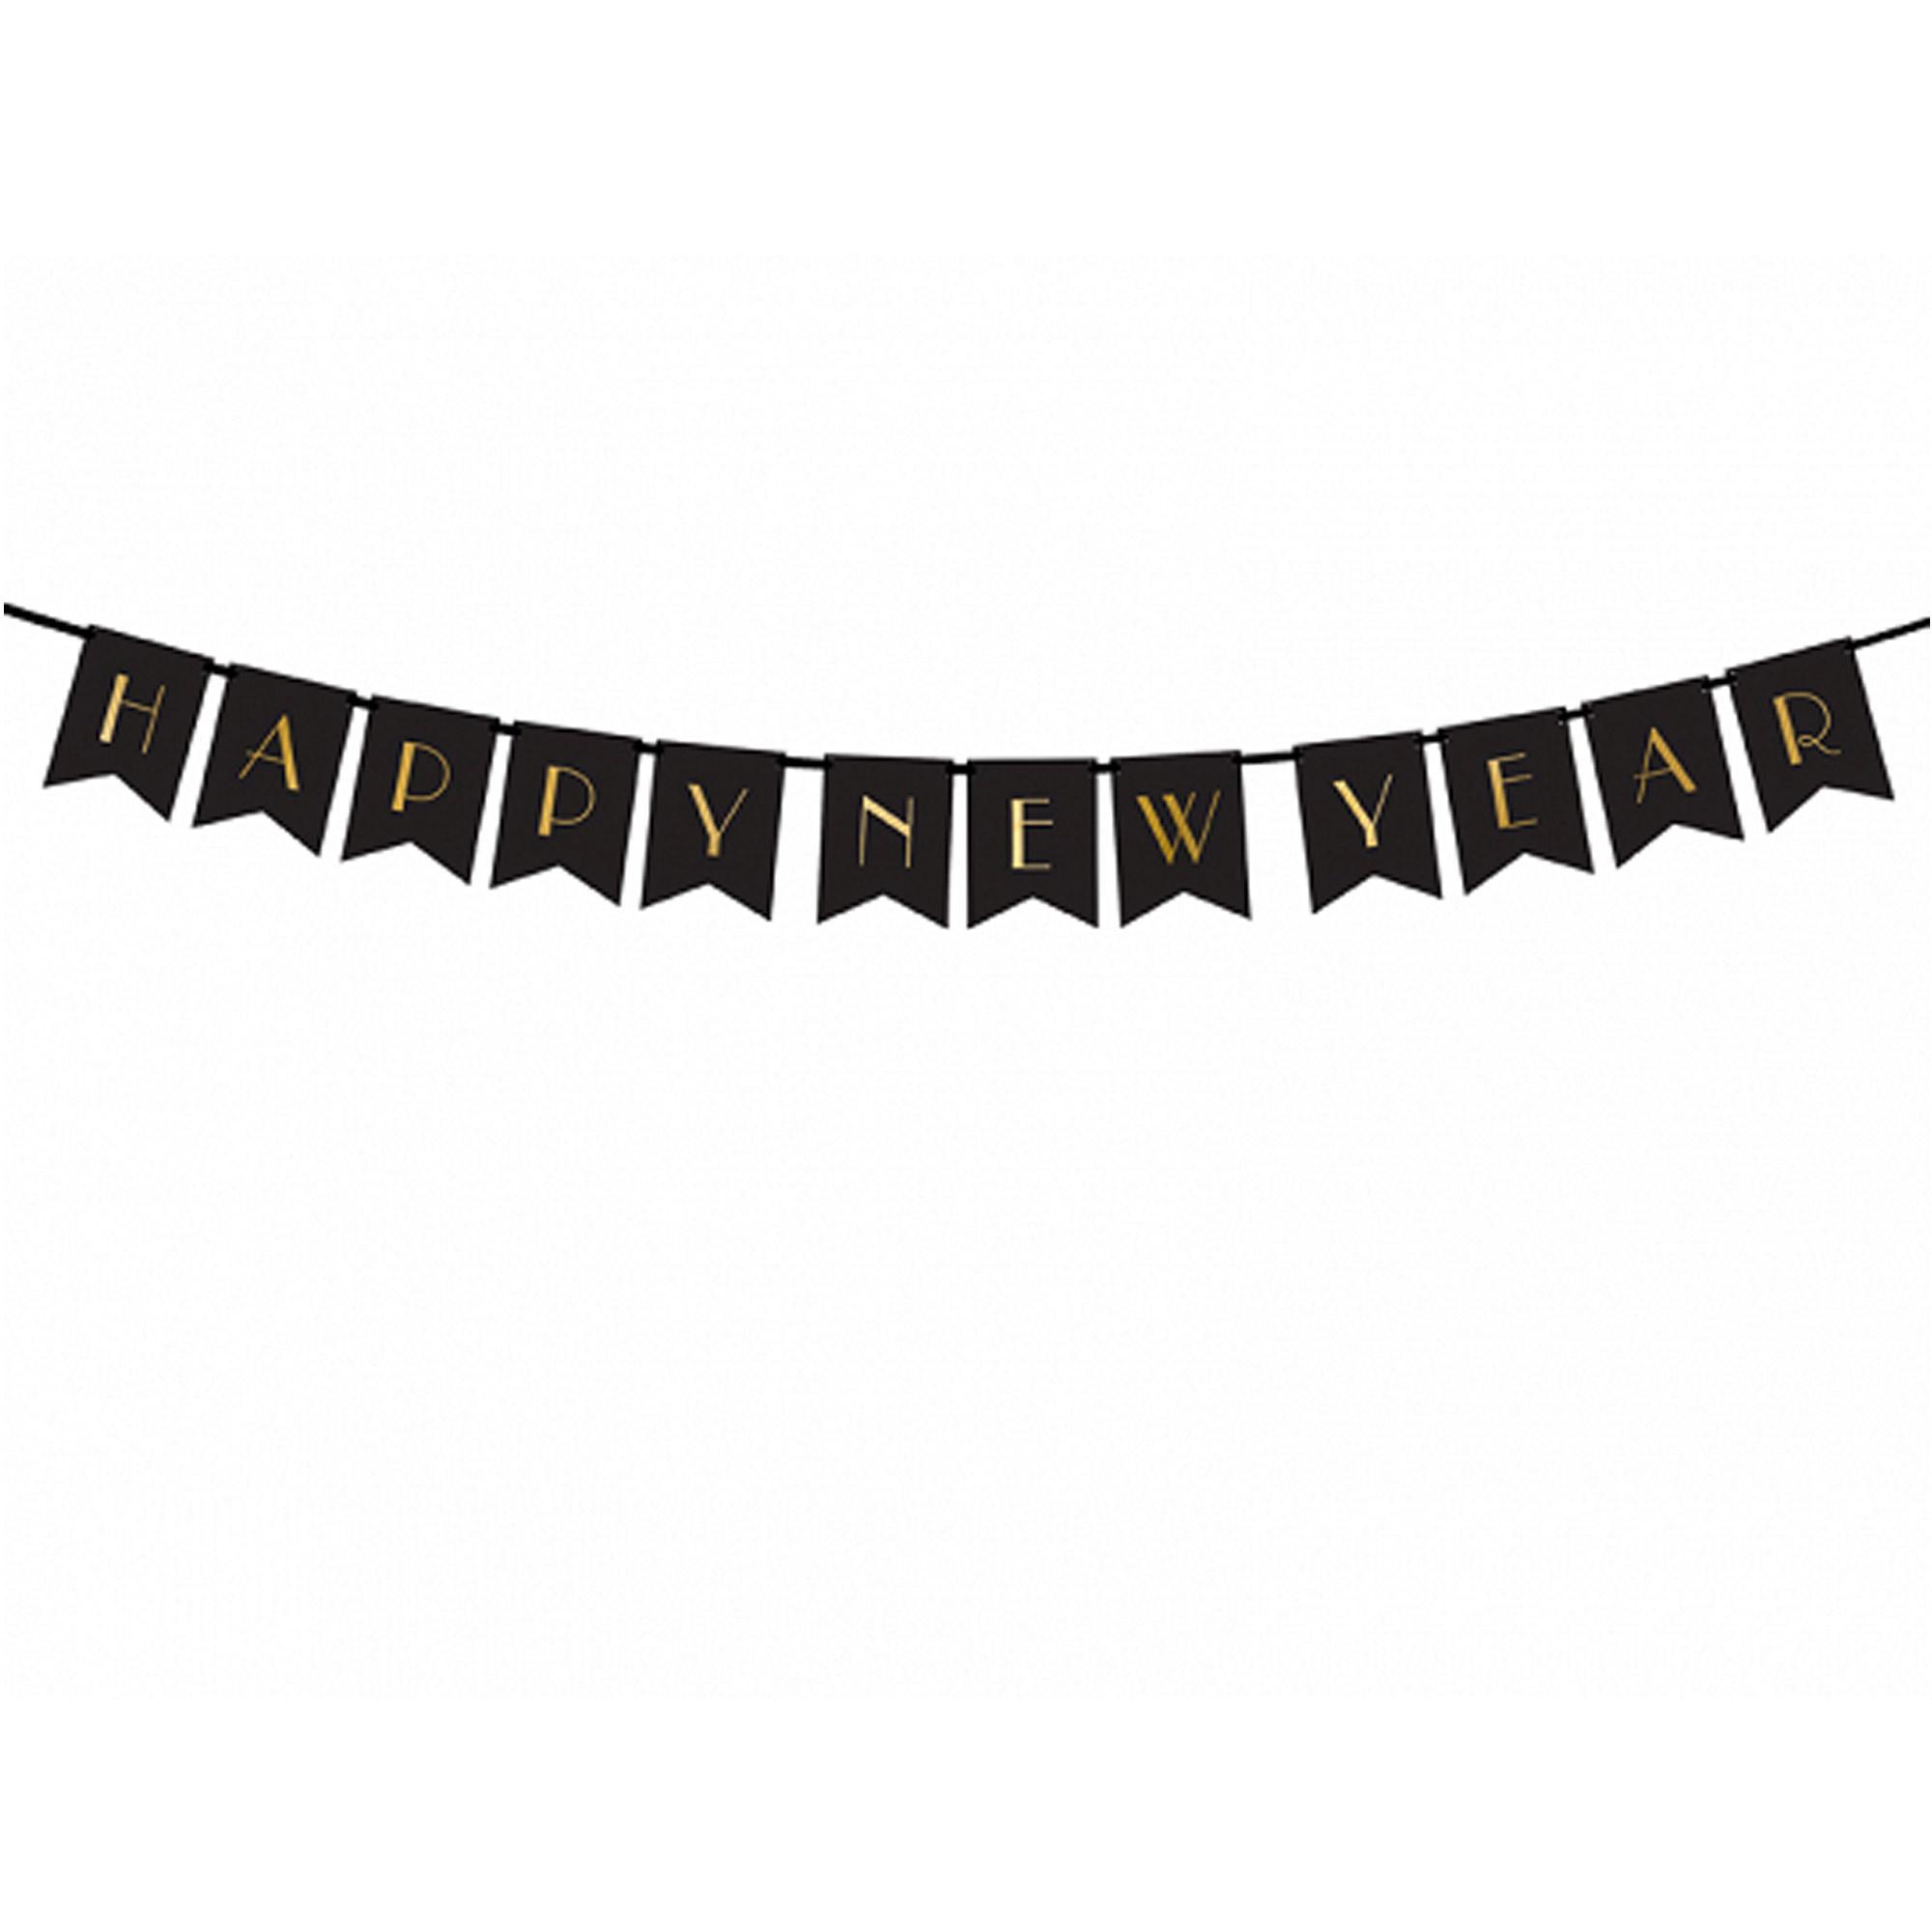 Happy New Year Black Banner 15x170cm Decorations - Party Centre